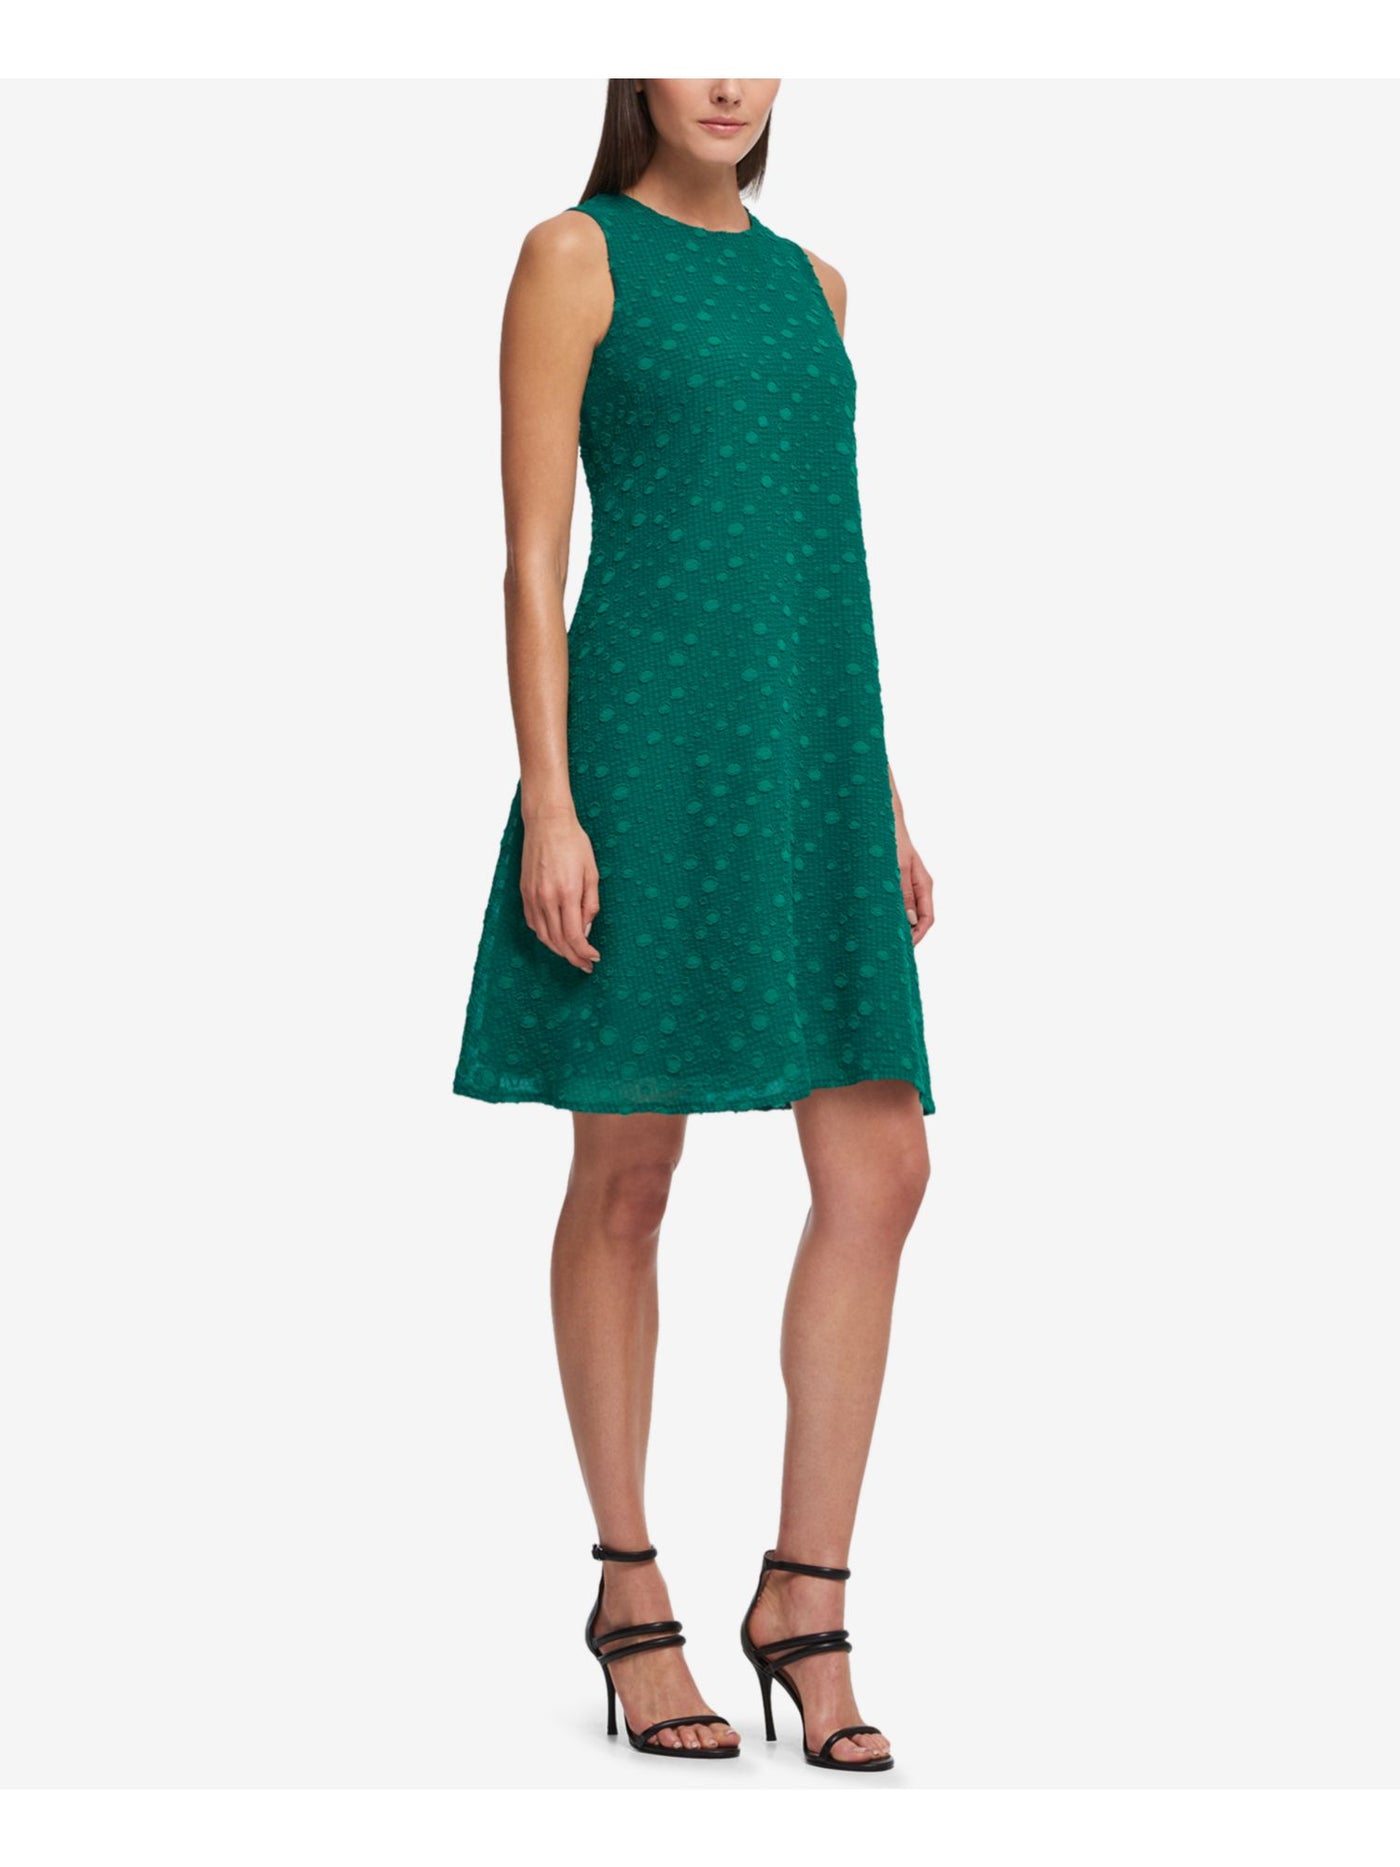 DKNY Womens Green Lace Textured Polka Dot Sleeveless Square Neck Above The Knee Cocktail Fit + Flare Dress 4